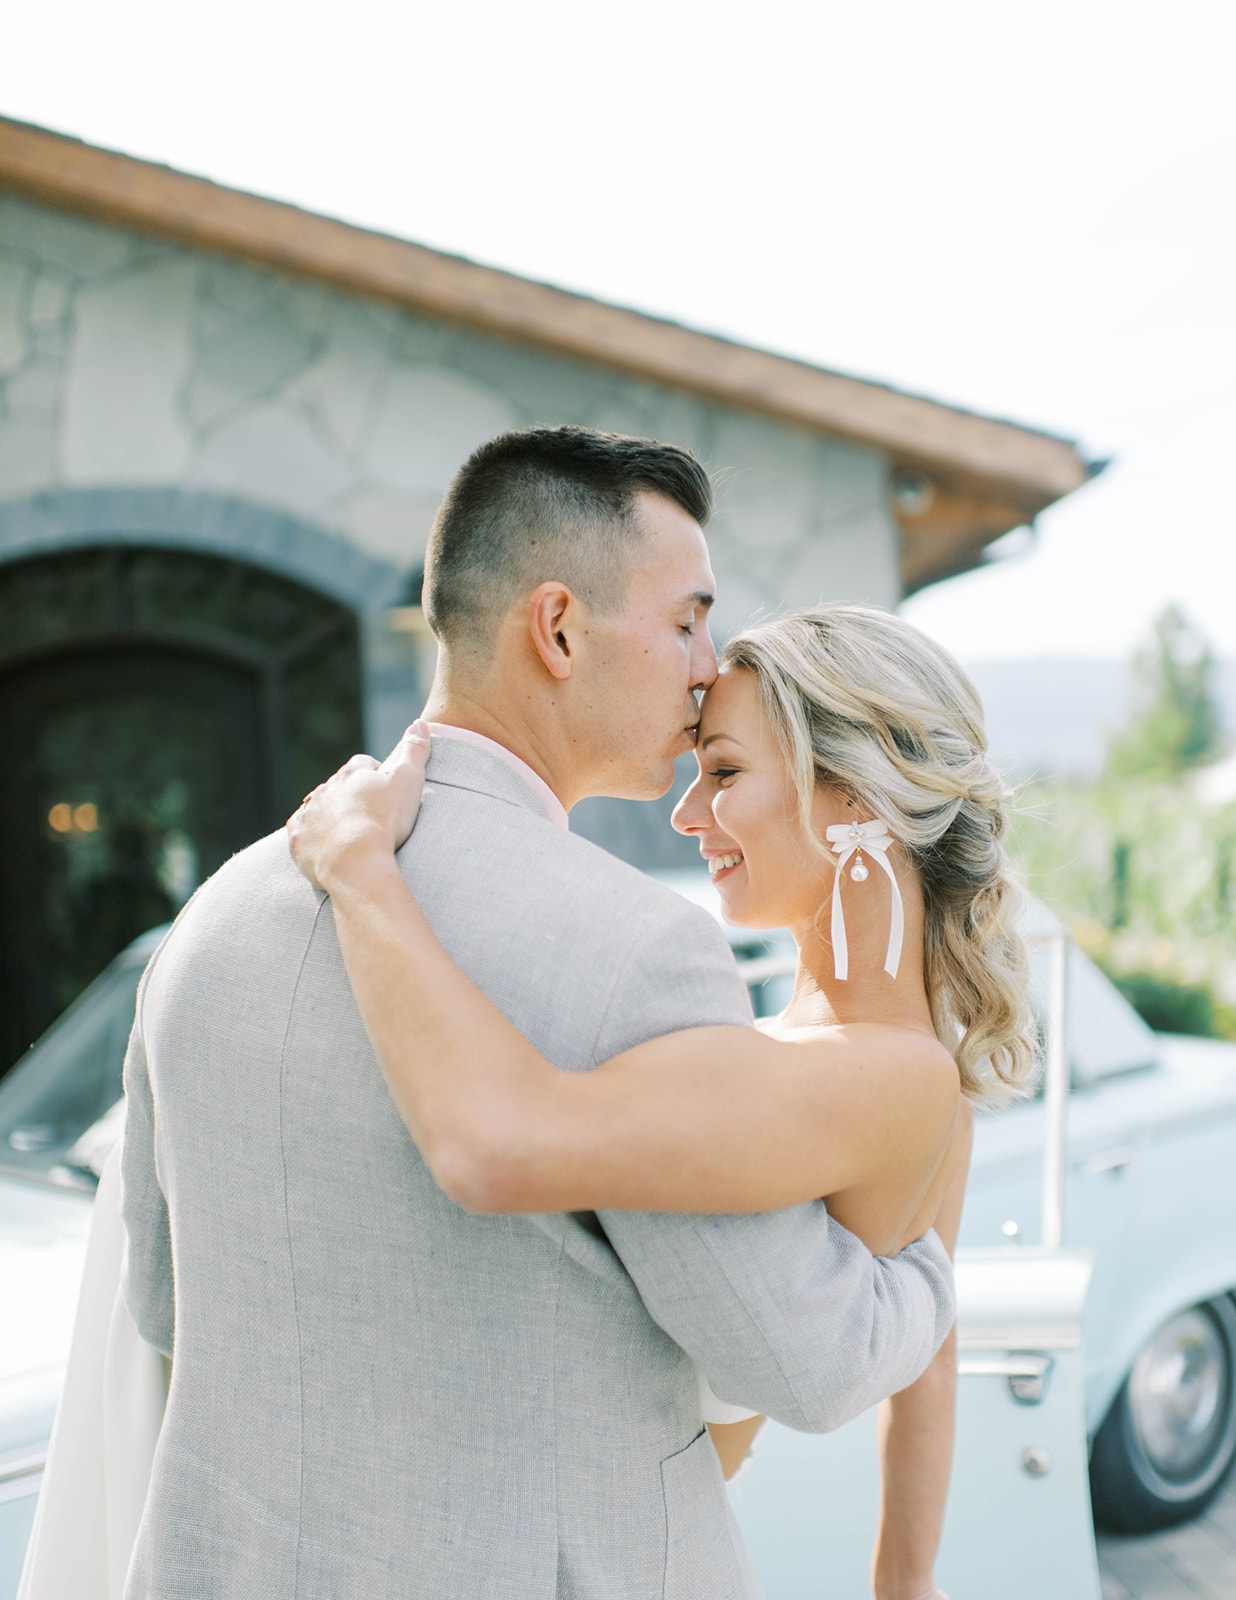 Classic car parked in front of an idyllic summer wedding venue, groom kisses bride's forehead ready to whisk her away in style, loose curls pulled back in a glamorous bridal hairstyle by Kathryn Ramsey Esthetics showcasing white bow earrings